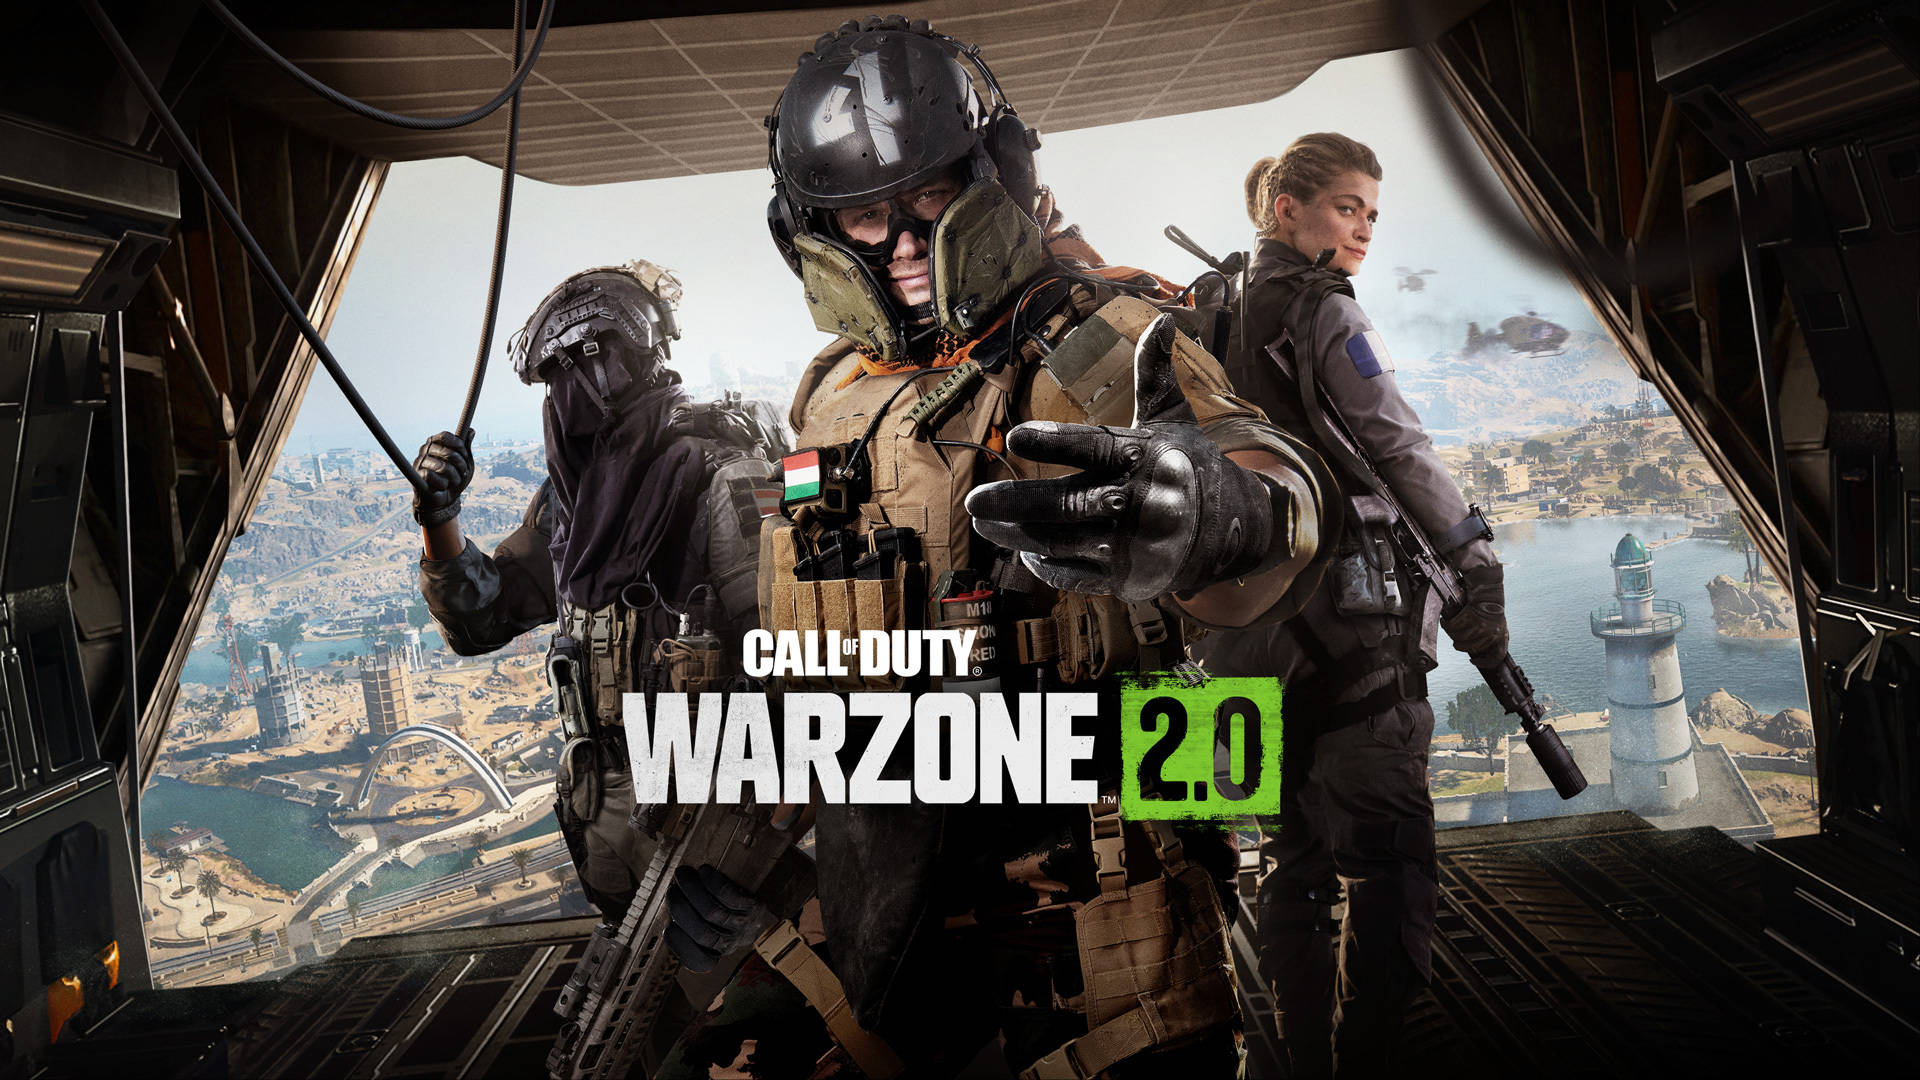 Warzone 2.0 social not working: How to fix Warzone 2.0 friends list not working?